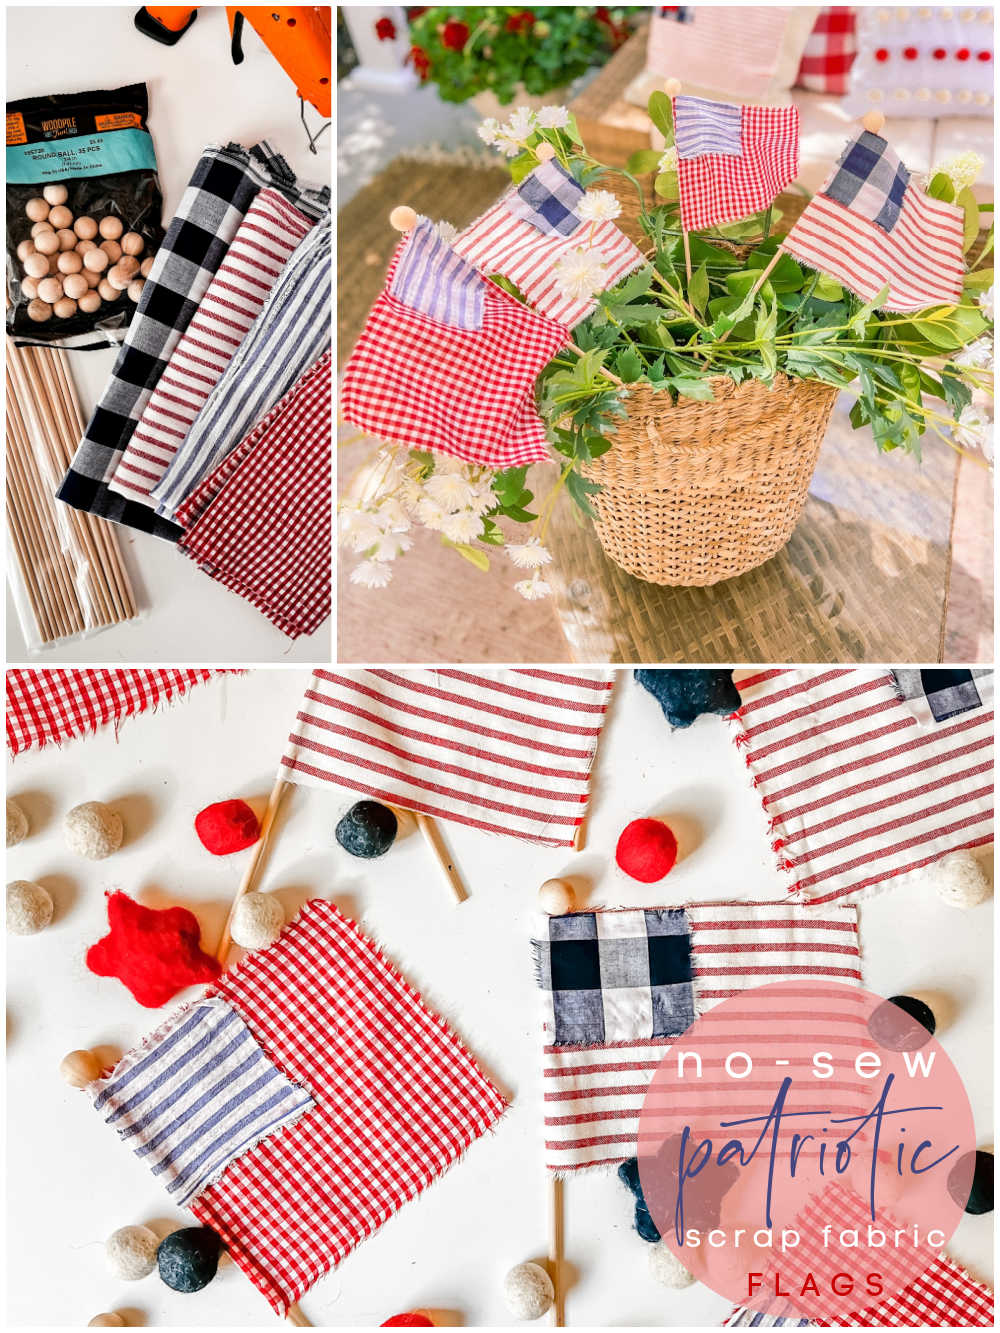 No-Sew Patriotic Scrap Flags. Mix and match left-over fabric to create pretty patriotic flags that can be used to decorate this summer!